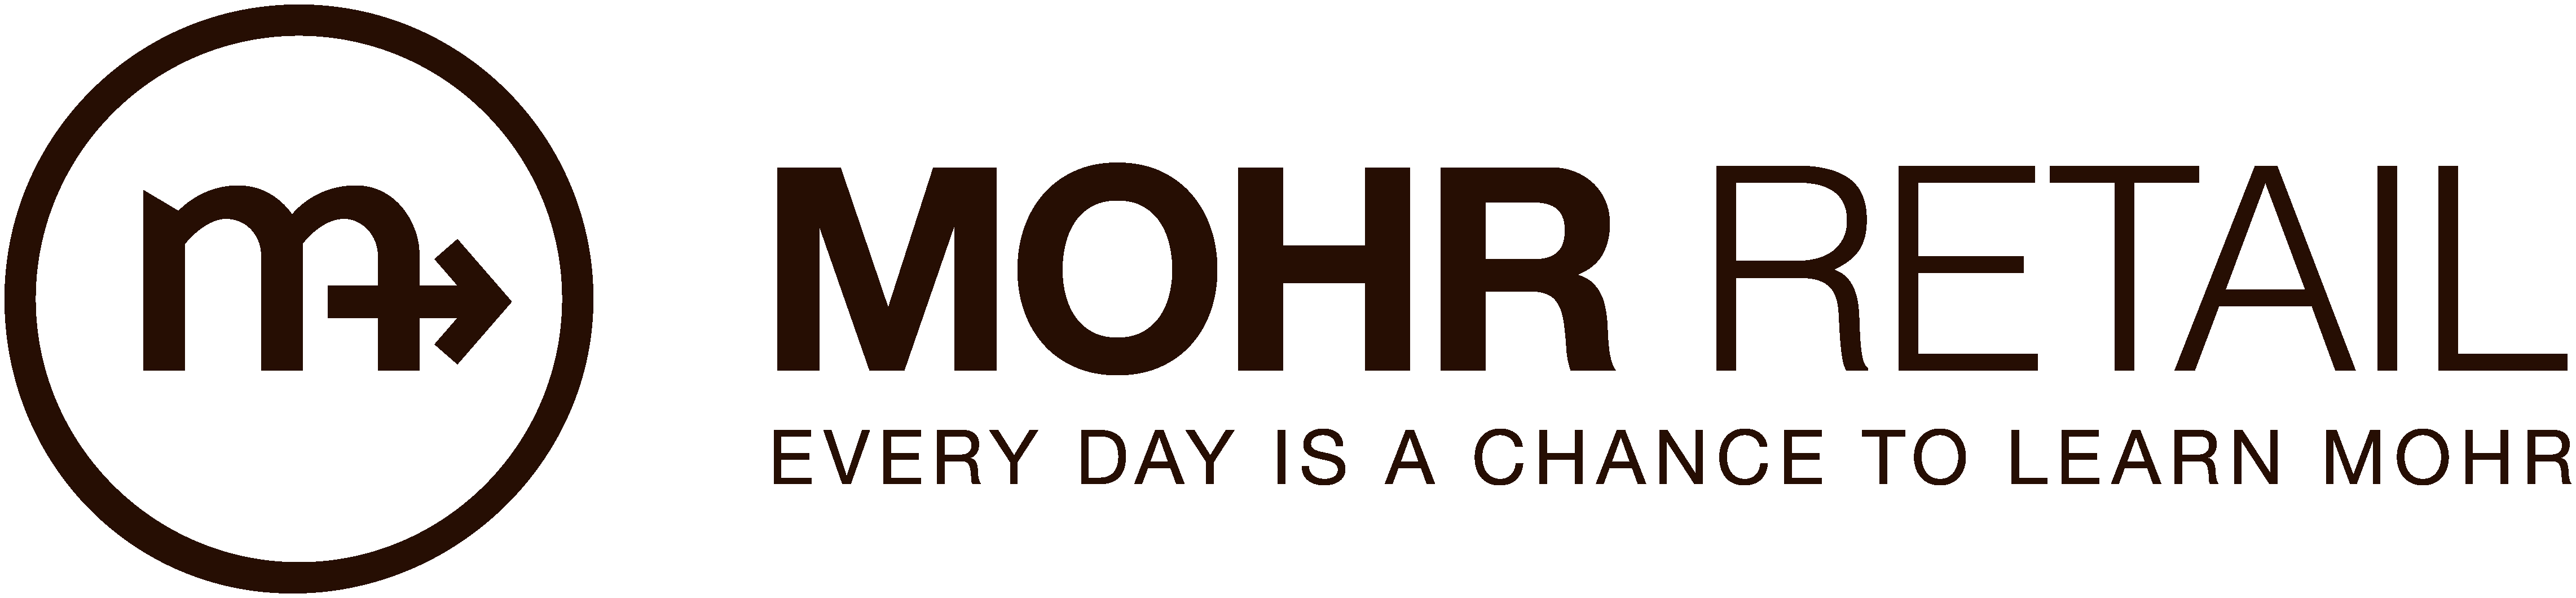 MOHR-Retail-Logo-with-Tag_1C